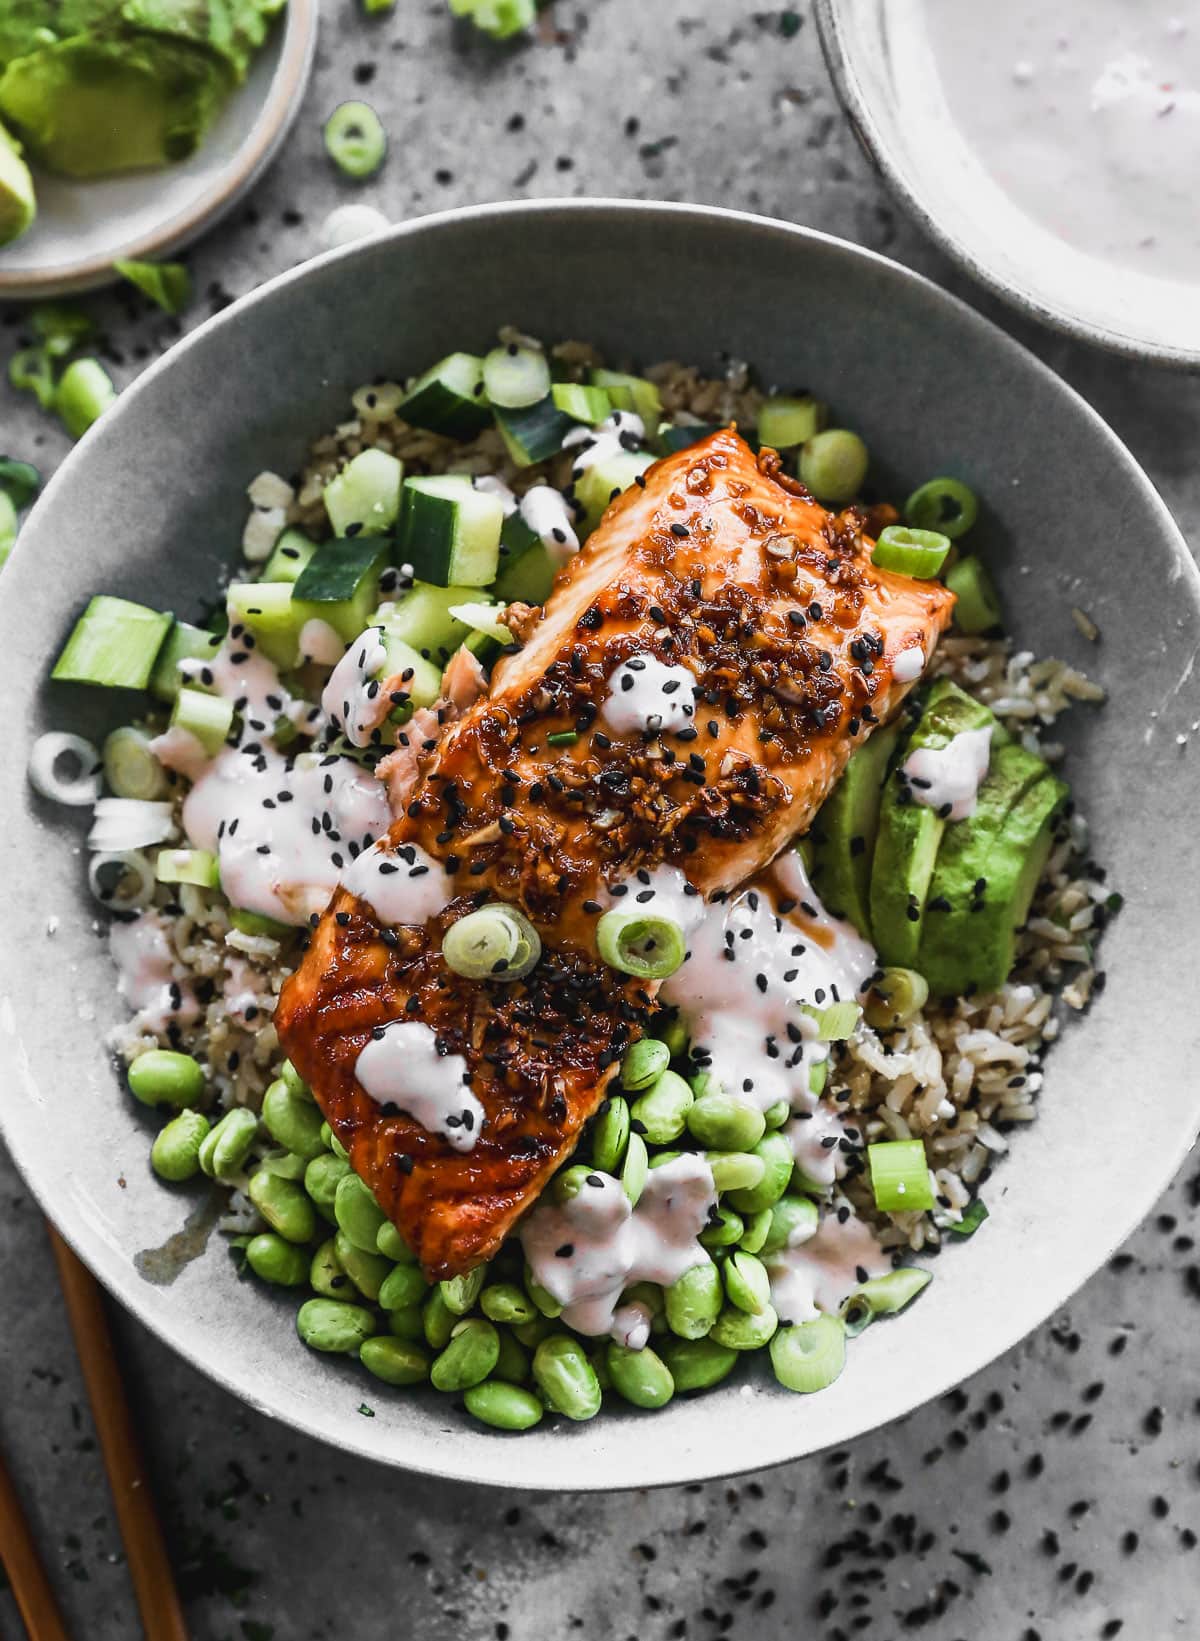 Teriyaki Salmon Bowls: A Quick, Healthy, and Flavorful Meal